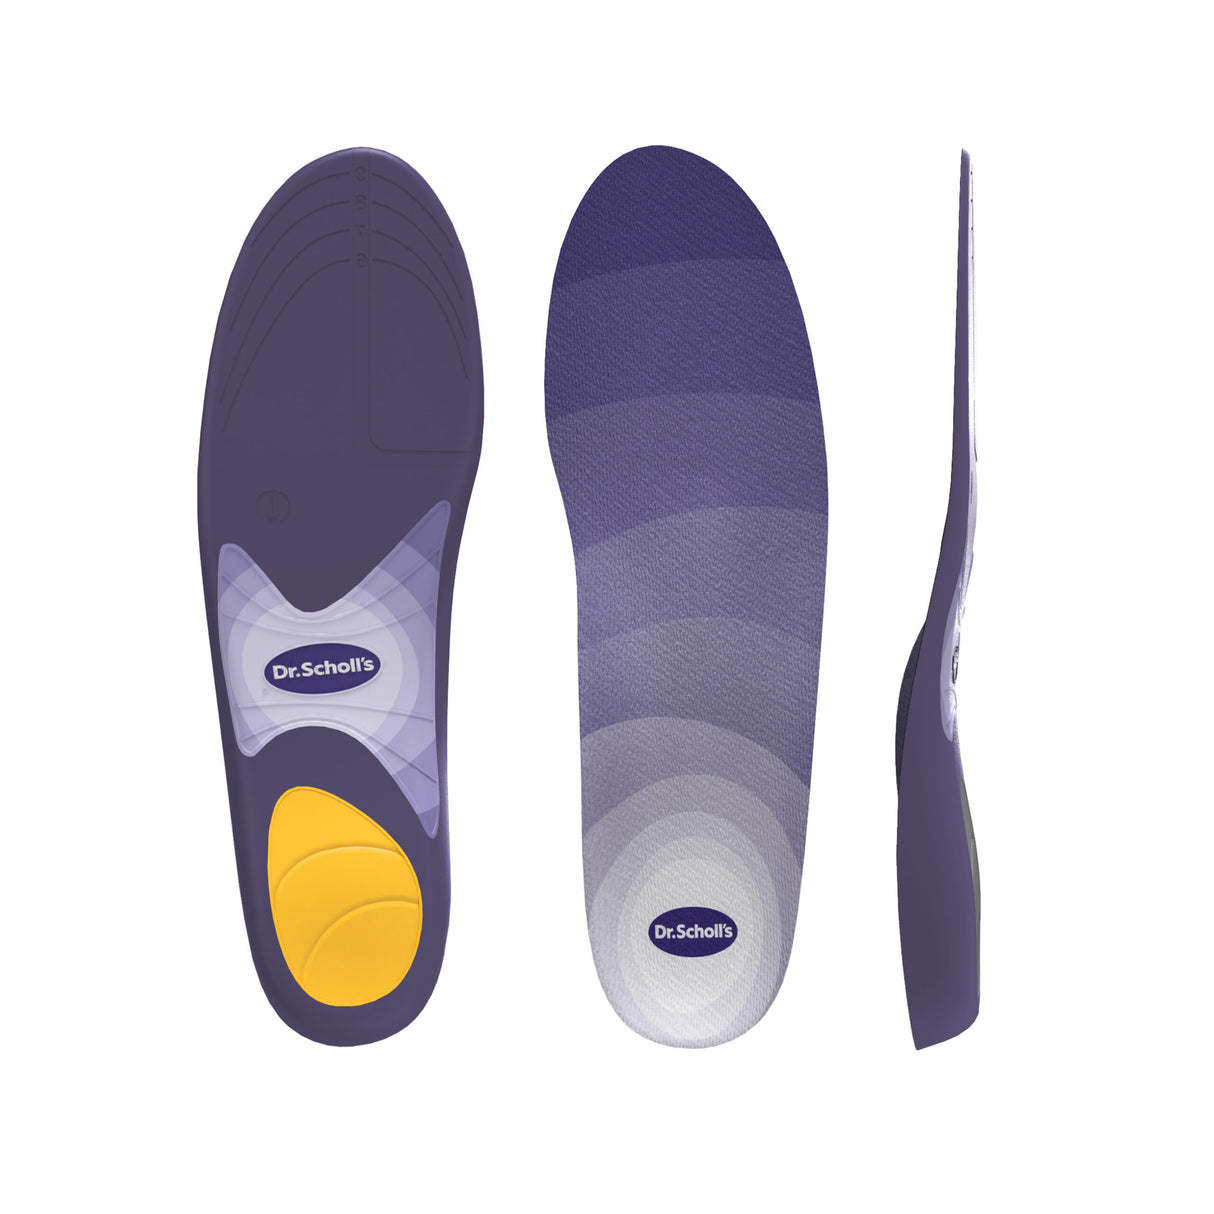 image of prevent pain insole